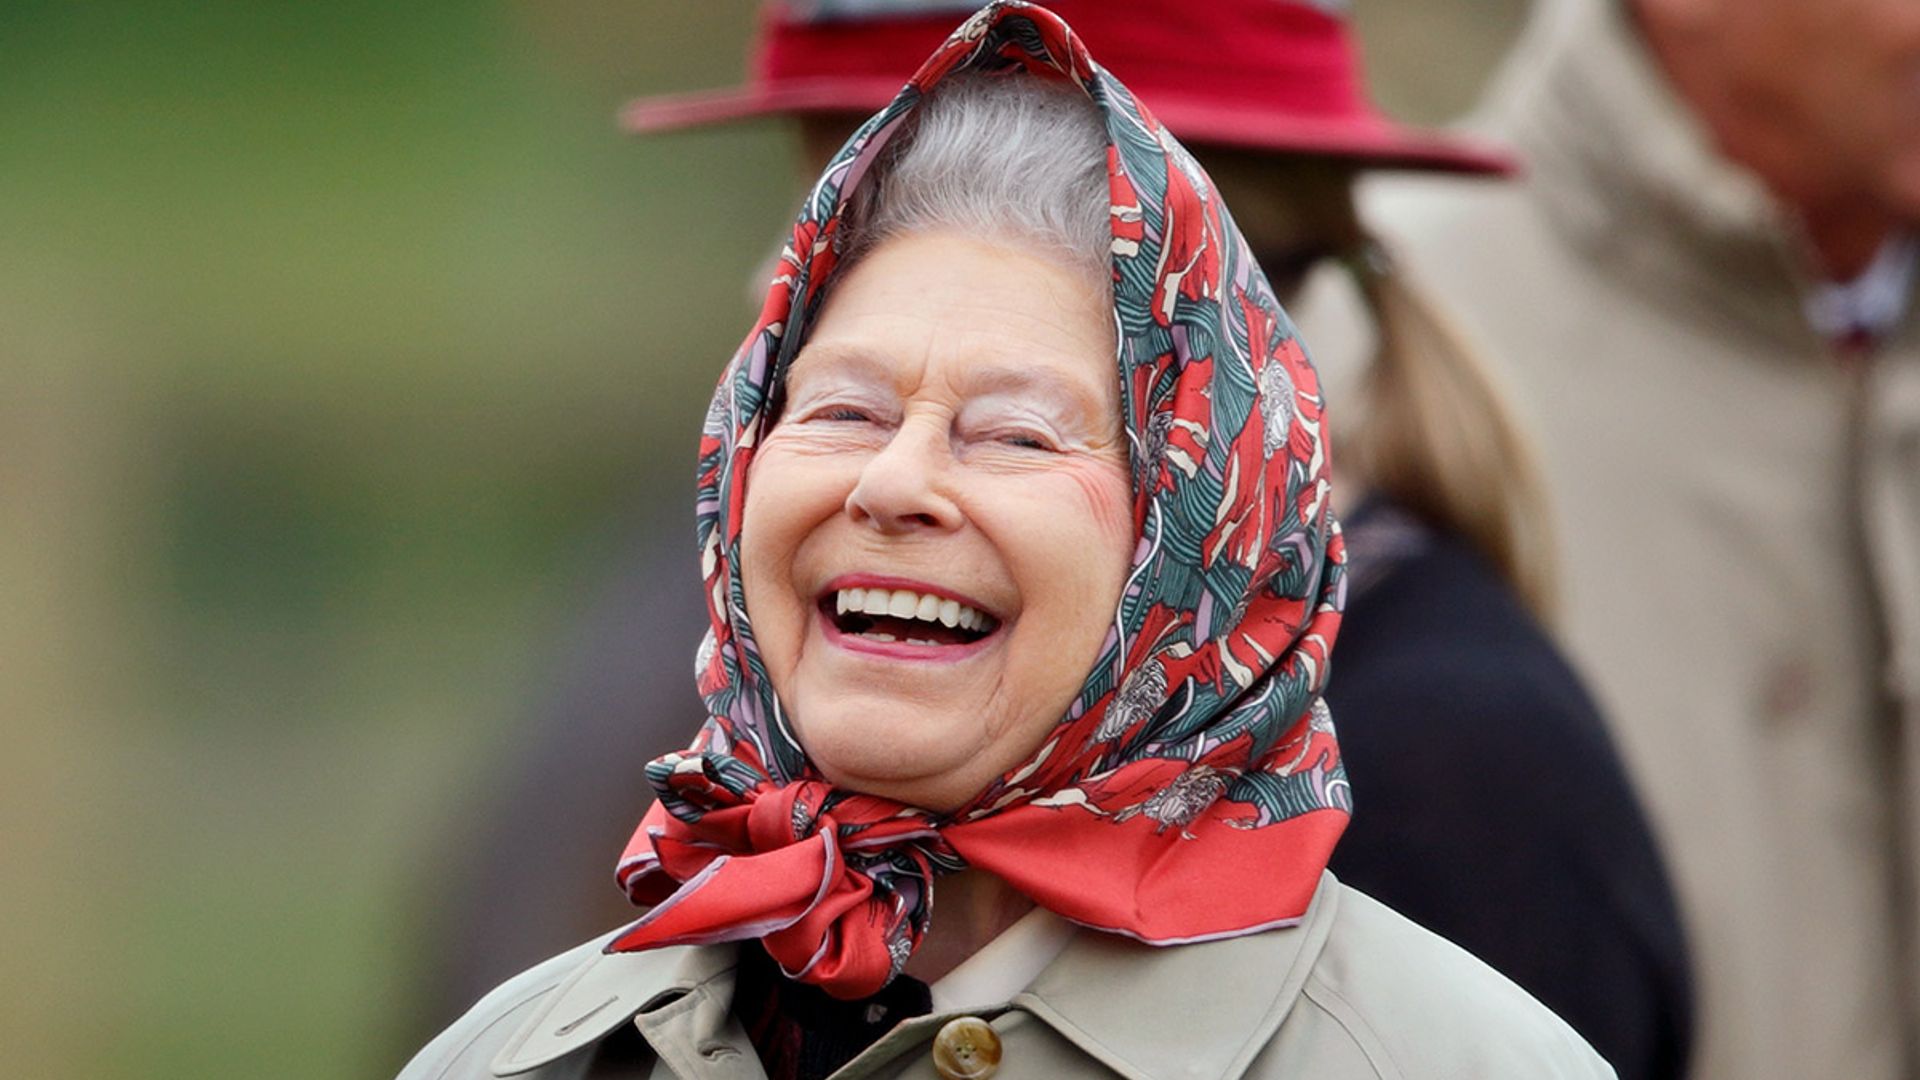 The Queen's 93rd birthday plans with royal family revealed